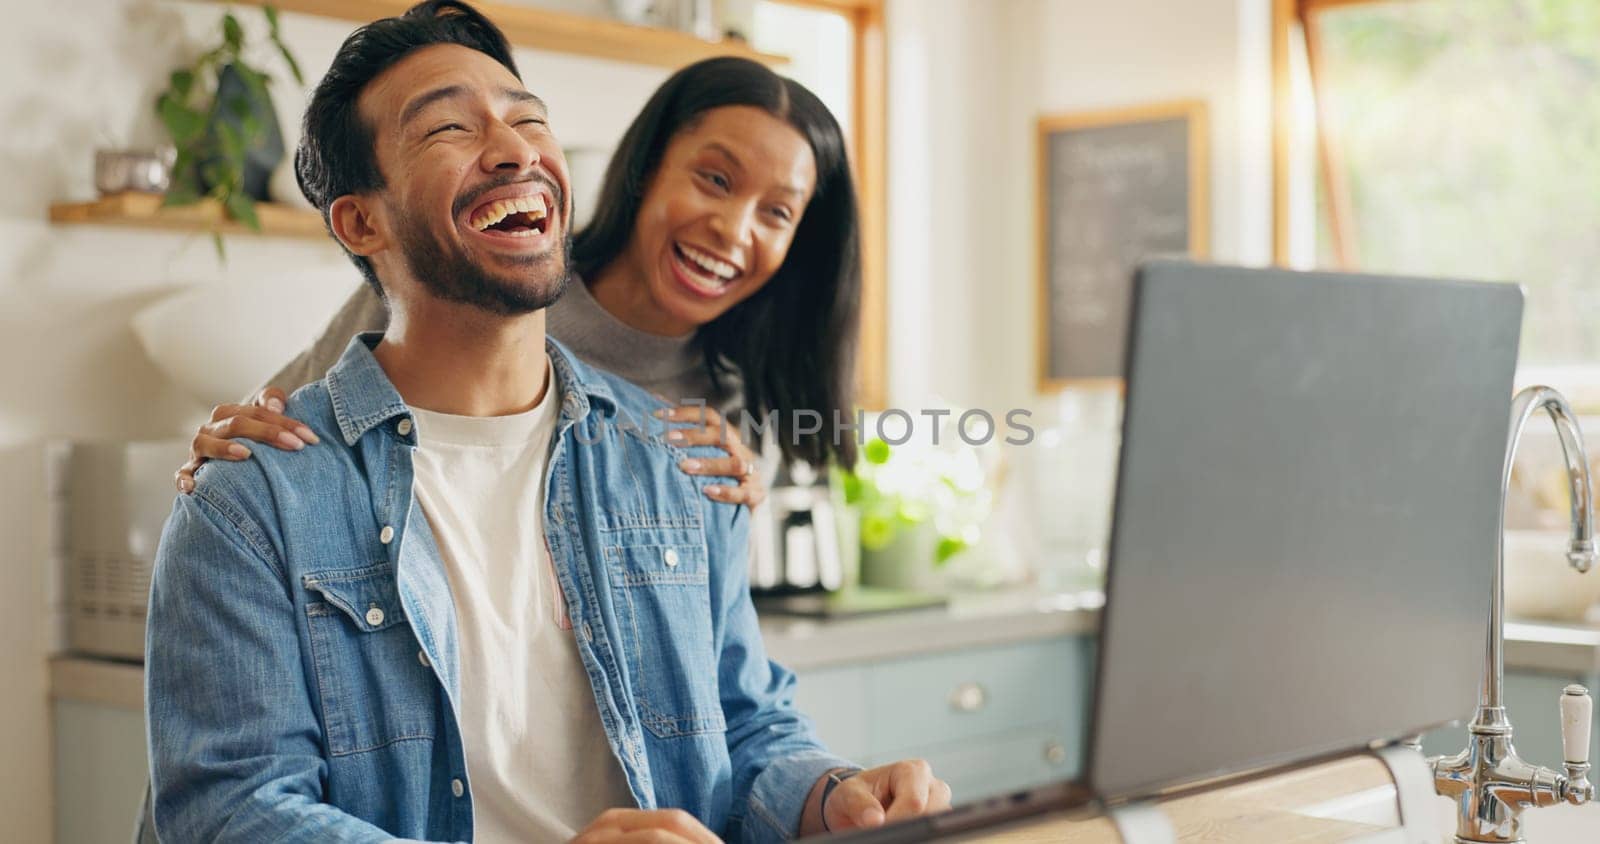 Kitchen, hug and couple with a tablet, love and internet connection with social media, home and speaking. Network, man and woman with a pc, talking and website information with romance and happiness.